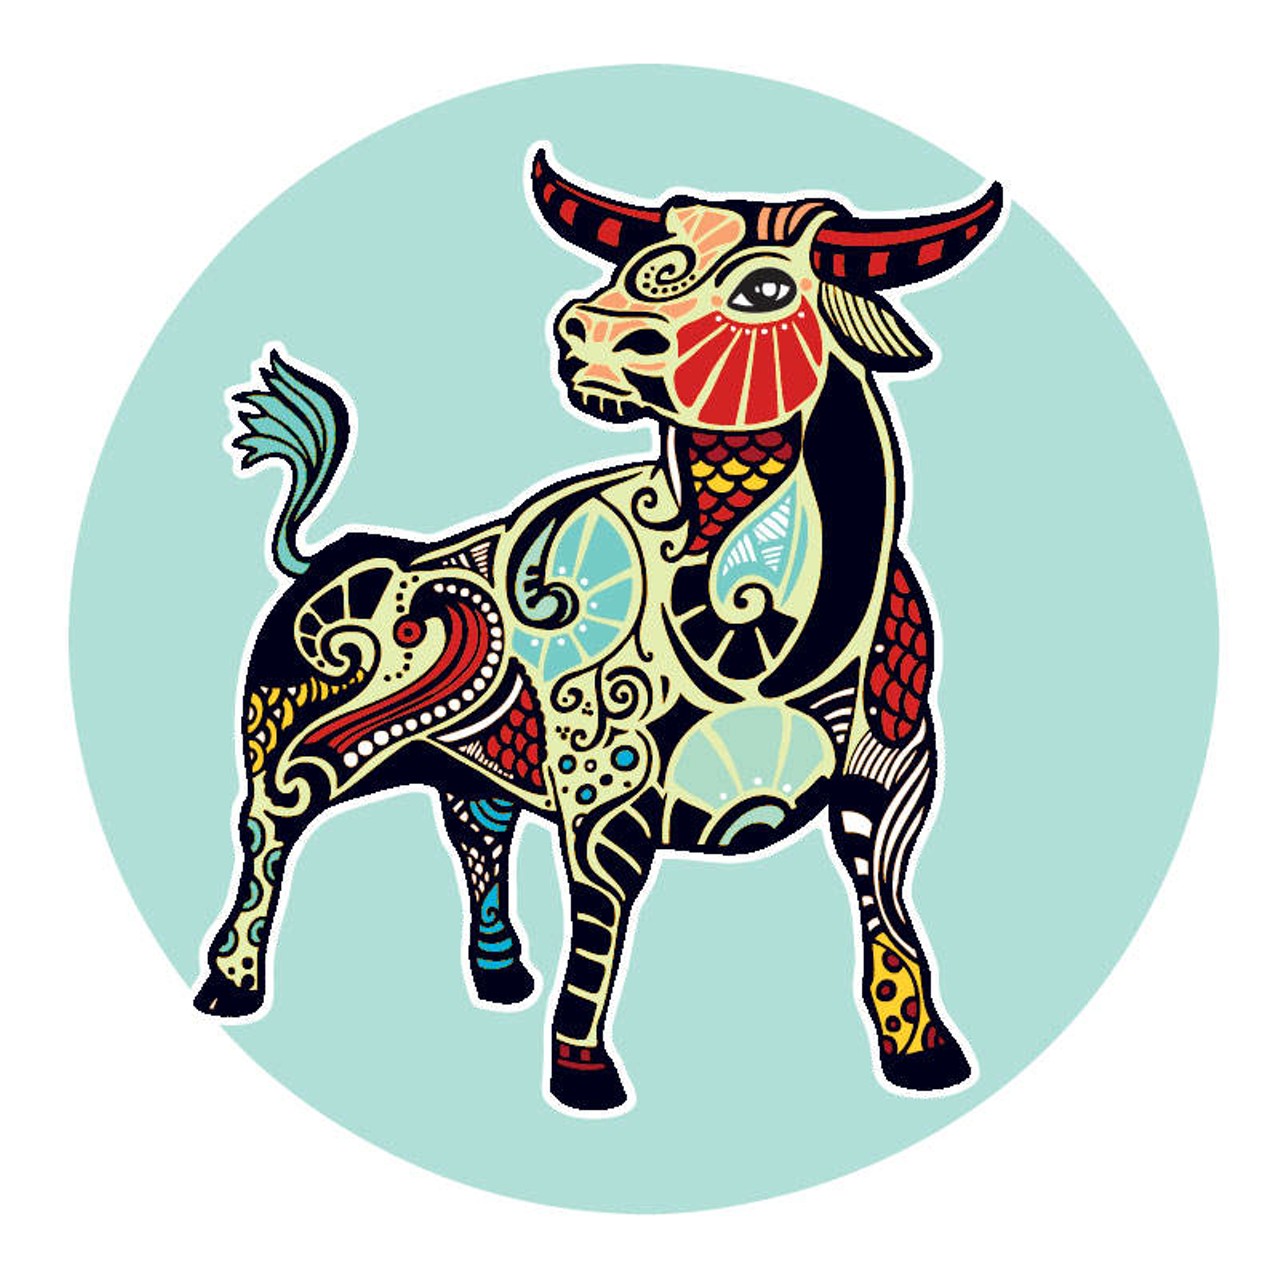 TAURUS: April 21 &#150; May 20
The pressure to perform is more like the ghost of your father telling you you're not doing it right. Half your life has been spent over doing the need to be perfect. Somewhere along the way you lost your connection to whatever it means to be you. The changes in your external reality, especially as far as your work is concerned, are a sign that the bigger part of you has overtaken the shadow of parental expectation. Now that you're free, who knows what you'll be able to do? It's clear to me that your life is too big to get stuck inside anyone's limits, including your own.